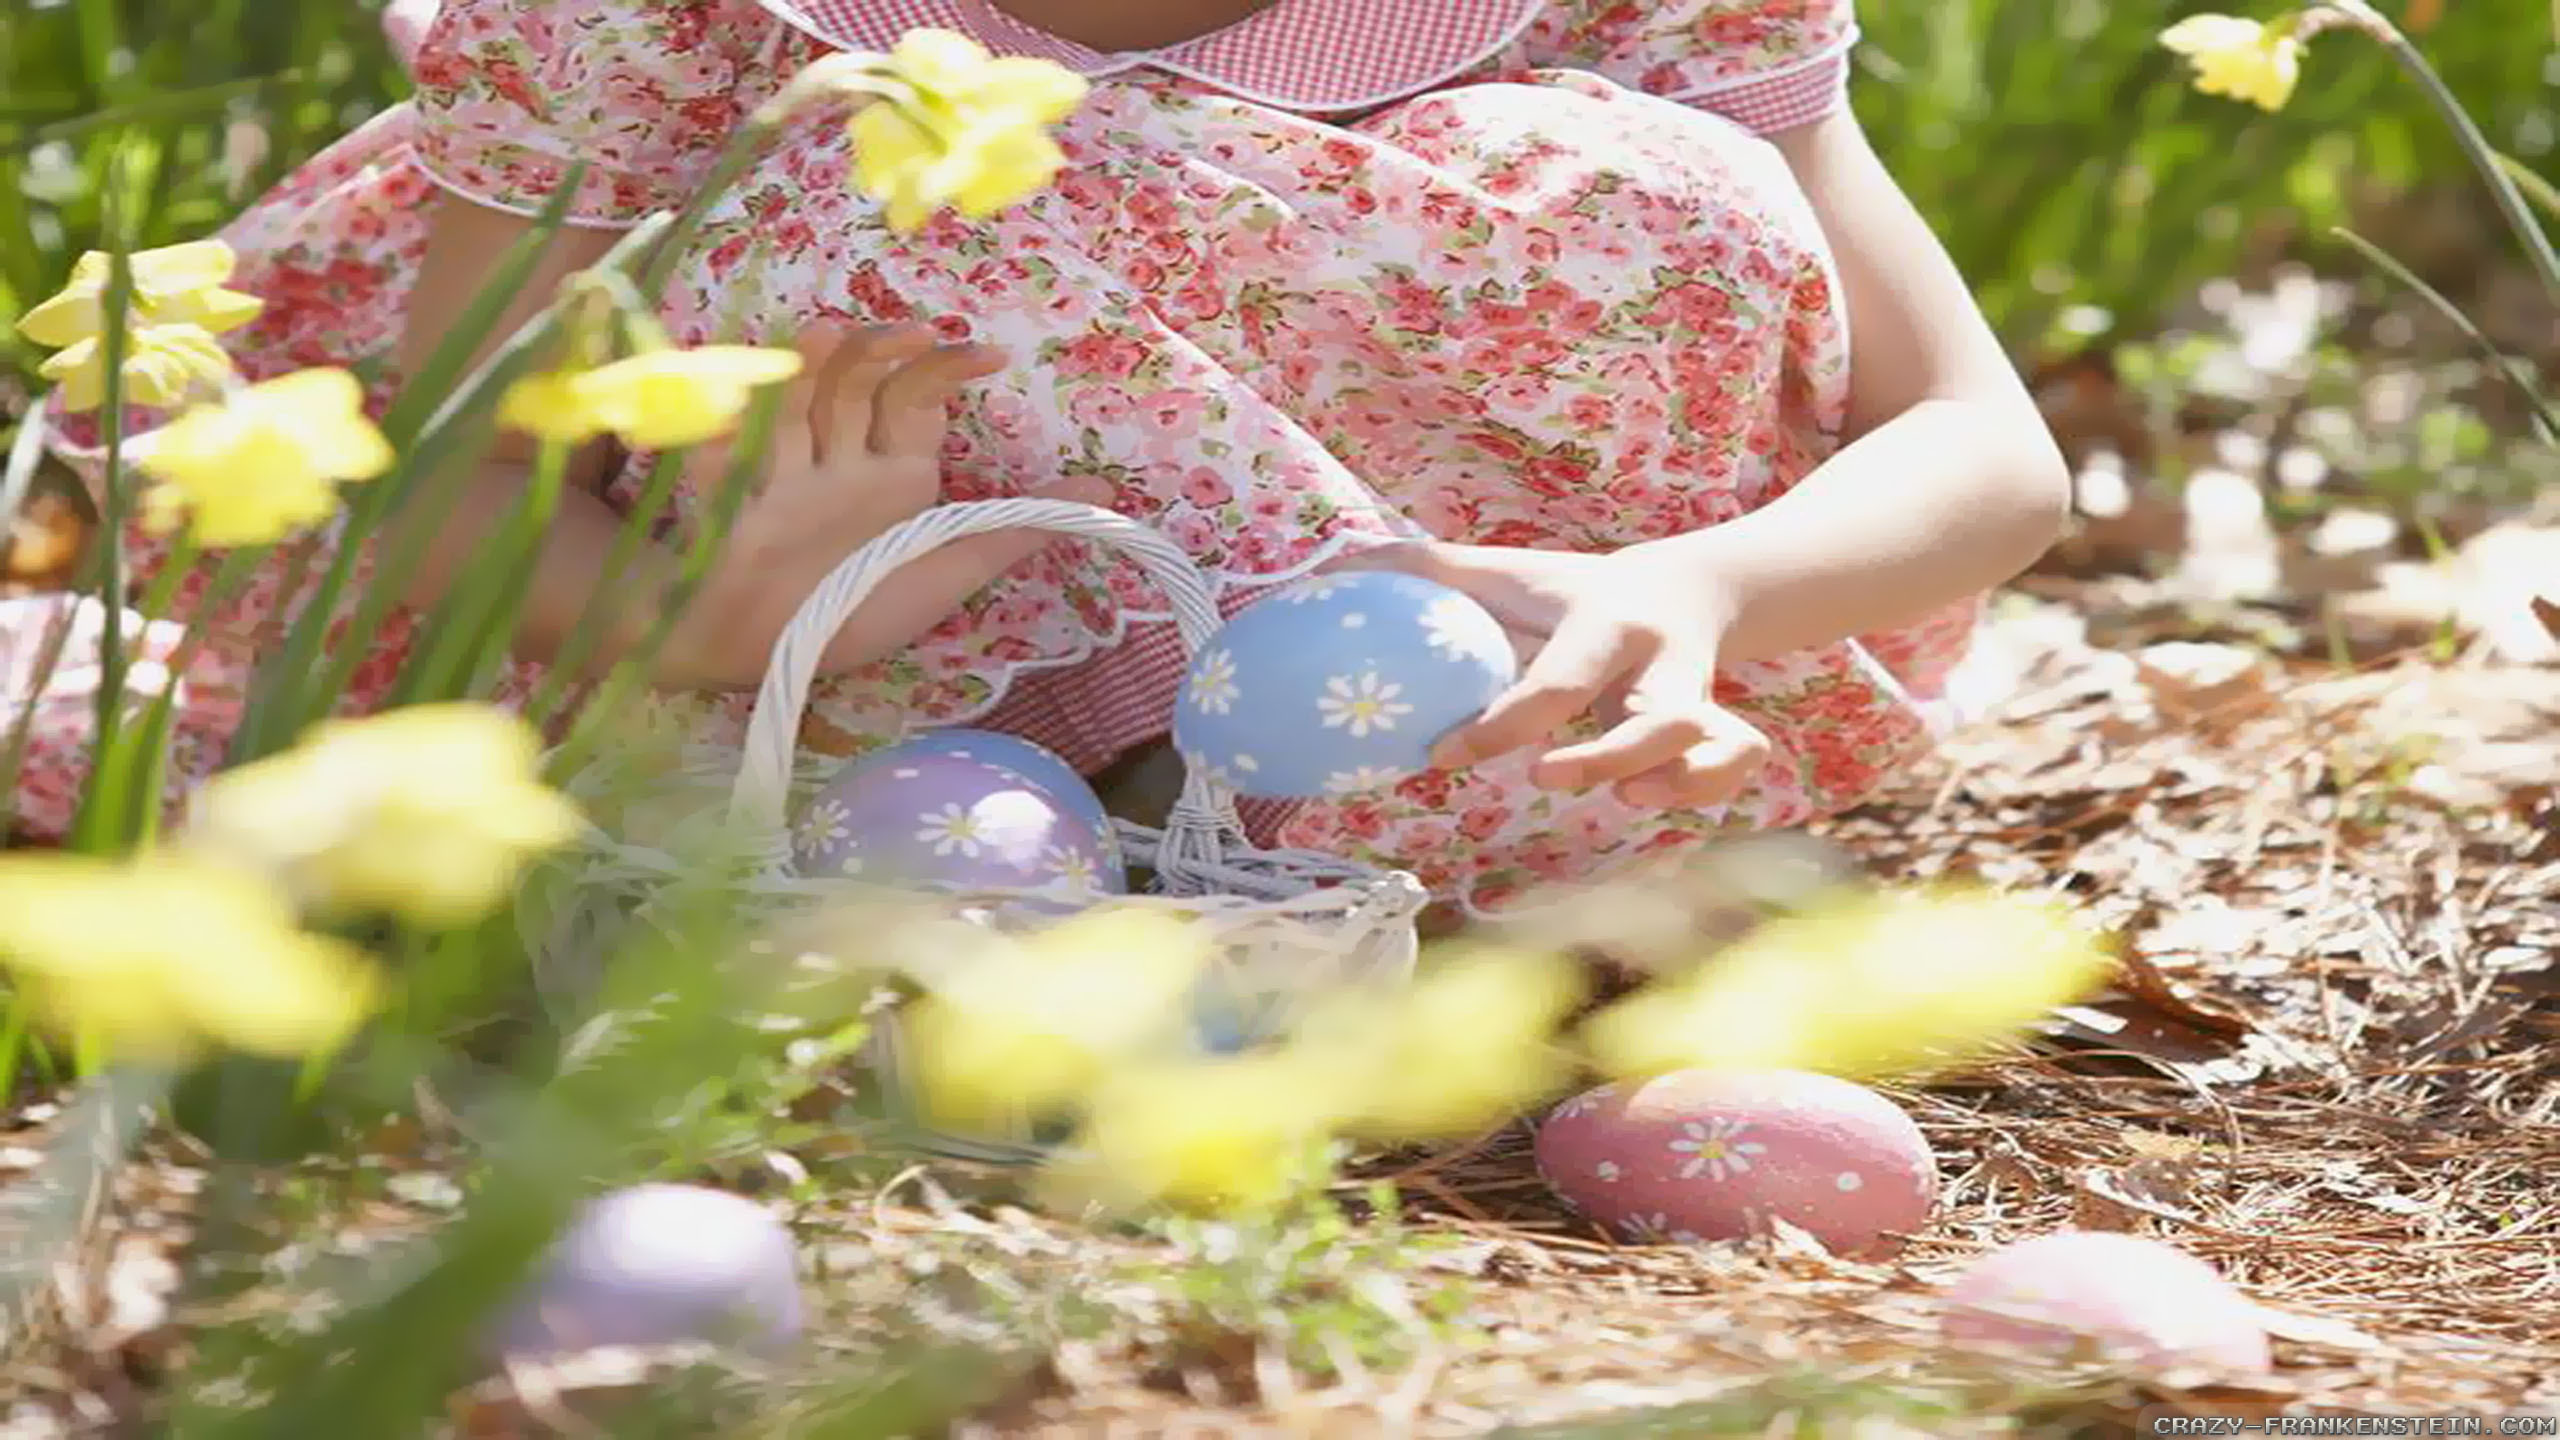 2560x1440 Videos Â· Home > Wallpapers > Easter wallpapers